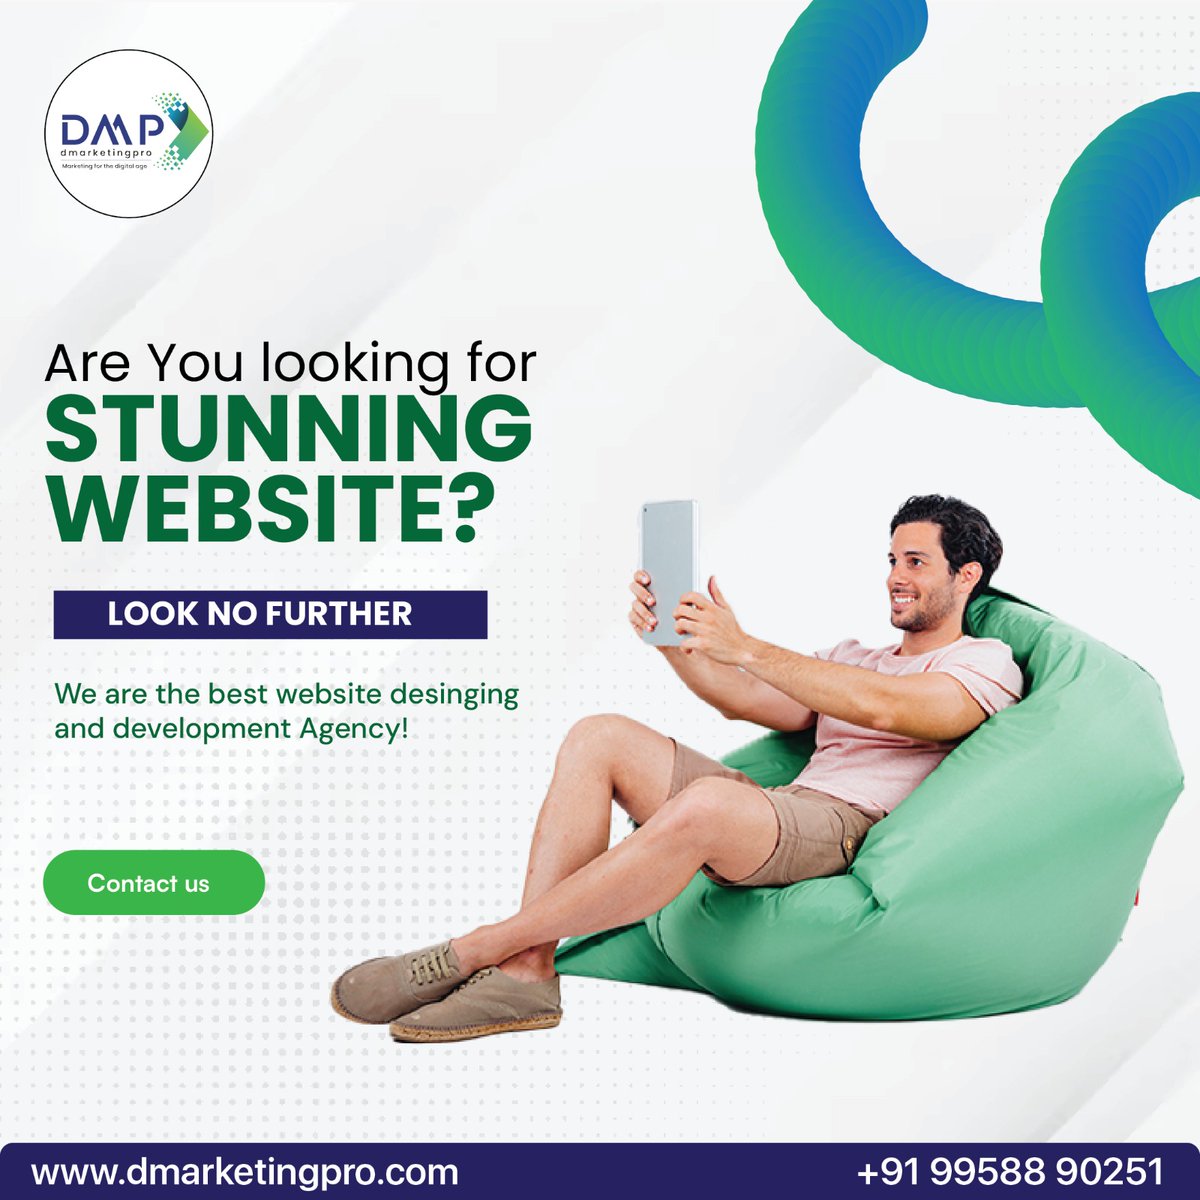 At D Marketing Pro, we craft bespoke websites tailored to your brand's unique identity and goals. With our expertise in responsive design, e-commerce solutions, and SEO, we're your partners in building a standout online presence.#webdevelopment #Website #Webdesign #DigitalMarket